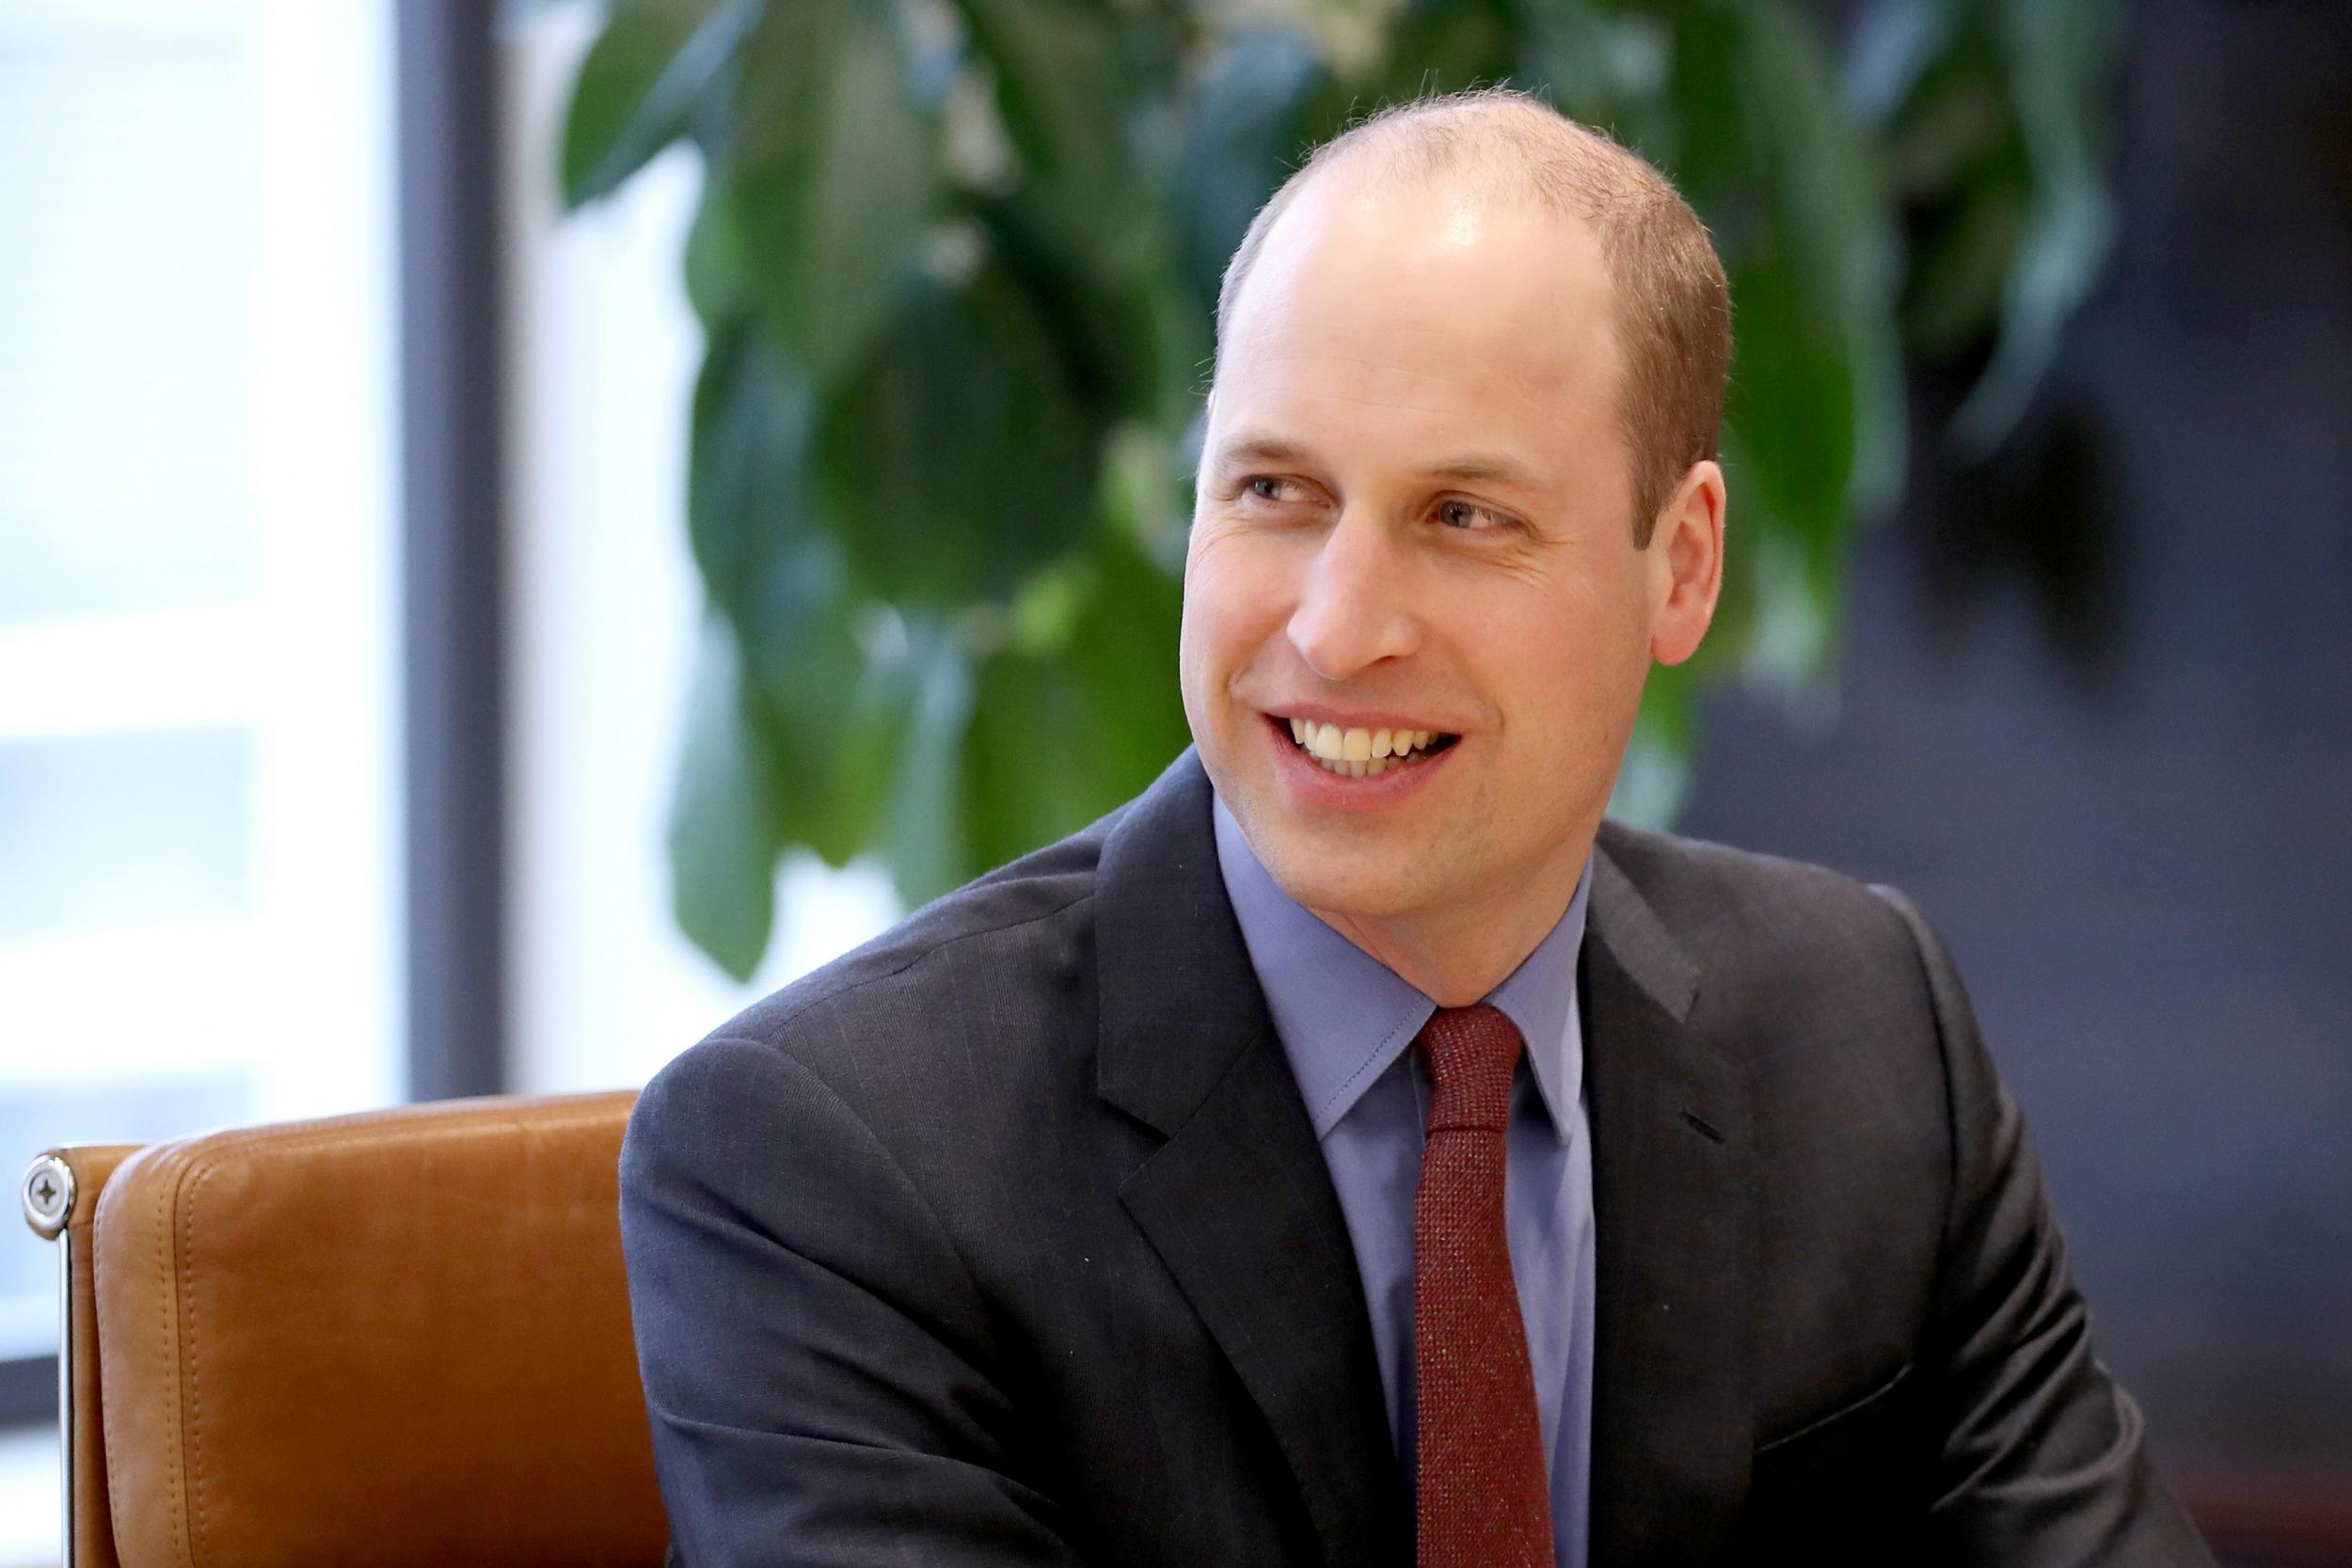 The Duke of Cambridge launched his Earthshot Prize, which encourages people to come up with ways of combating the climate crisis, last year